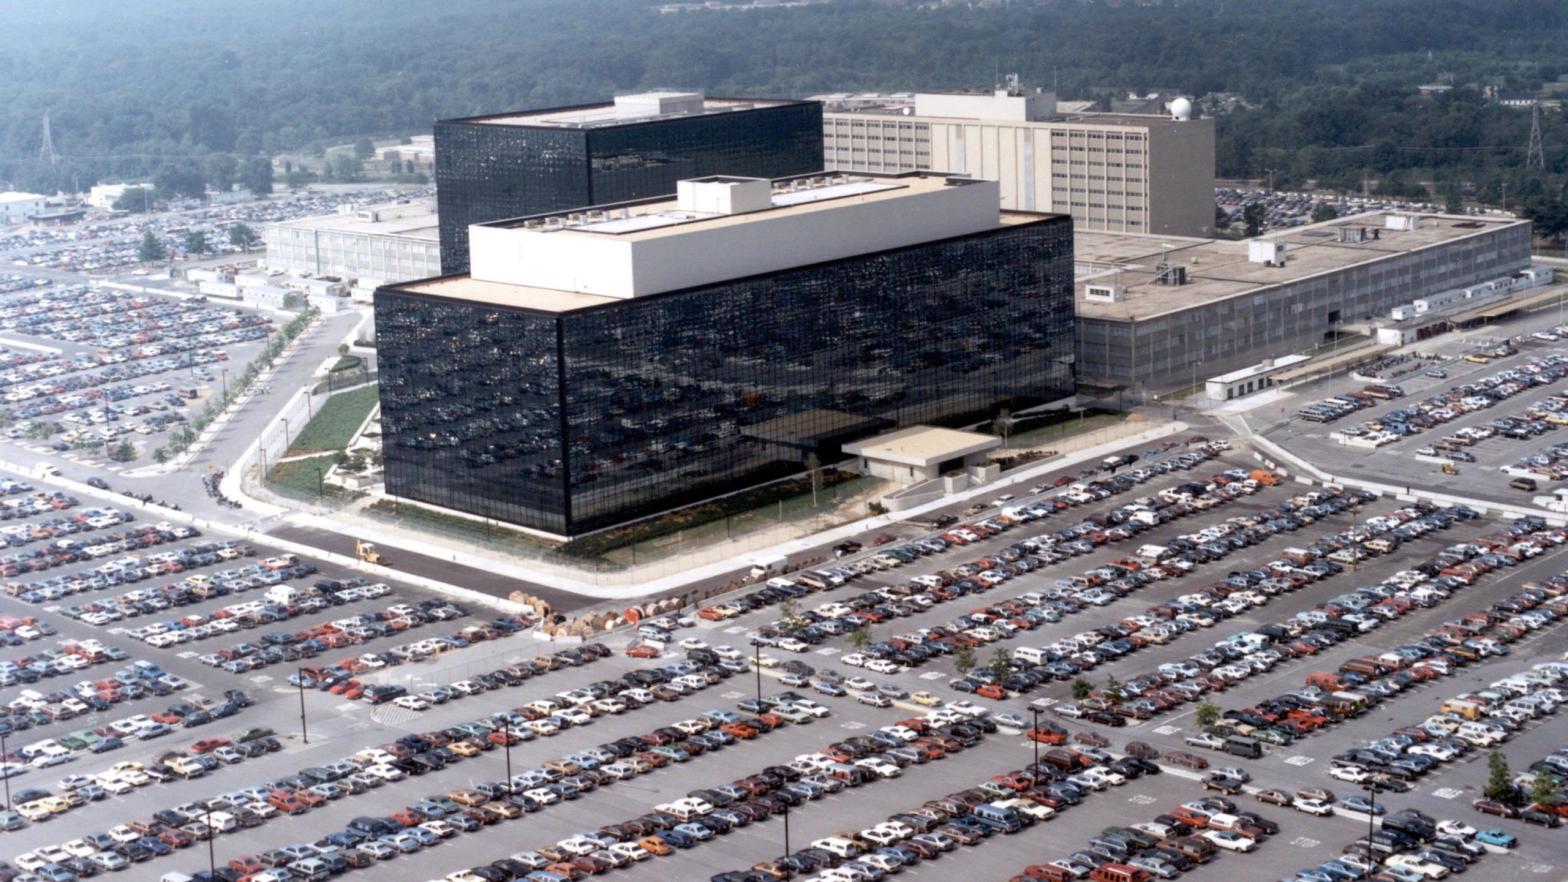 This undated photo provided by the National Security Agency (NSA) shows its headquarters in Fort Meade, Maryland. (Photo: NSA, Getty Images)